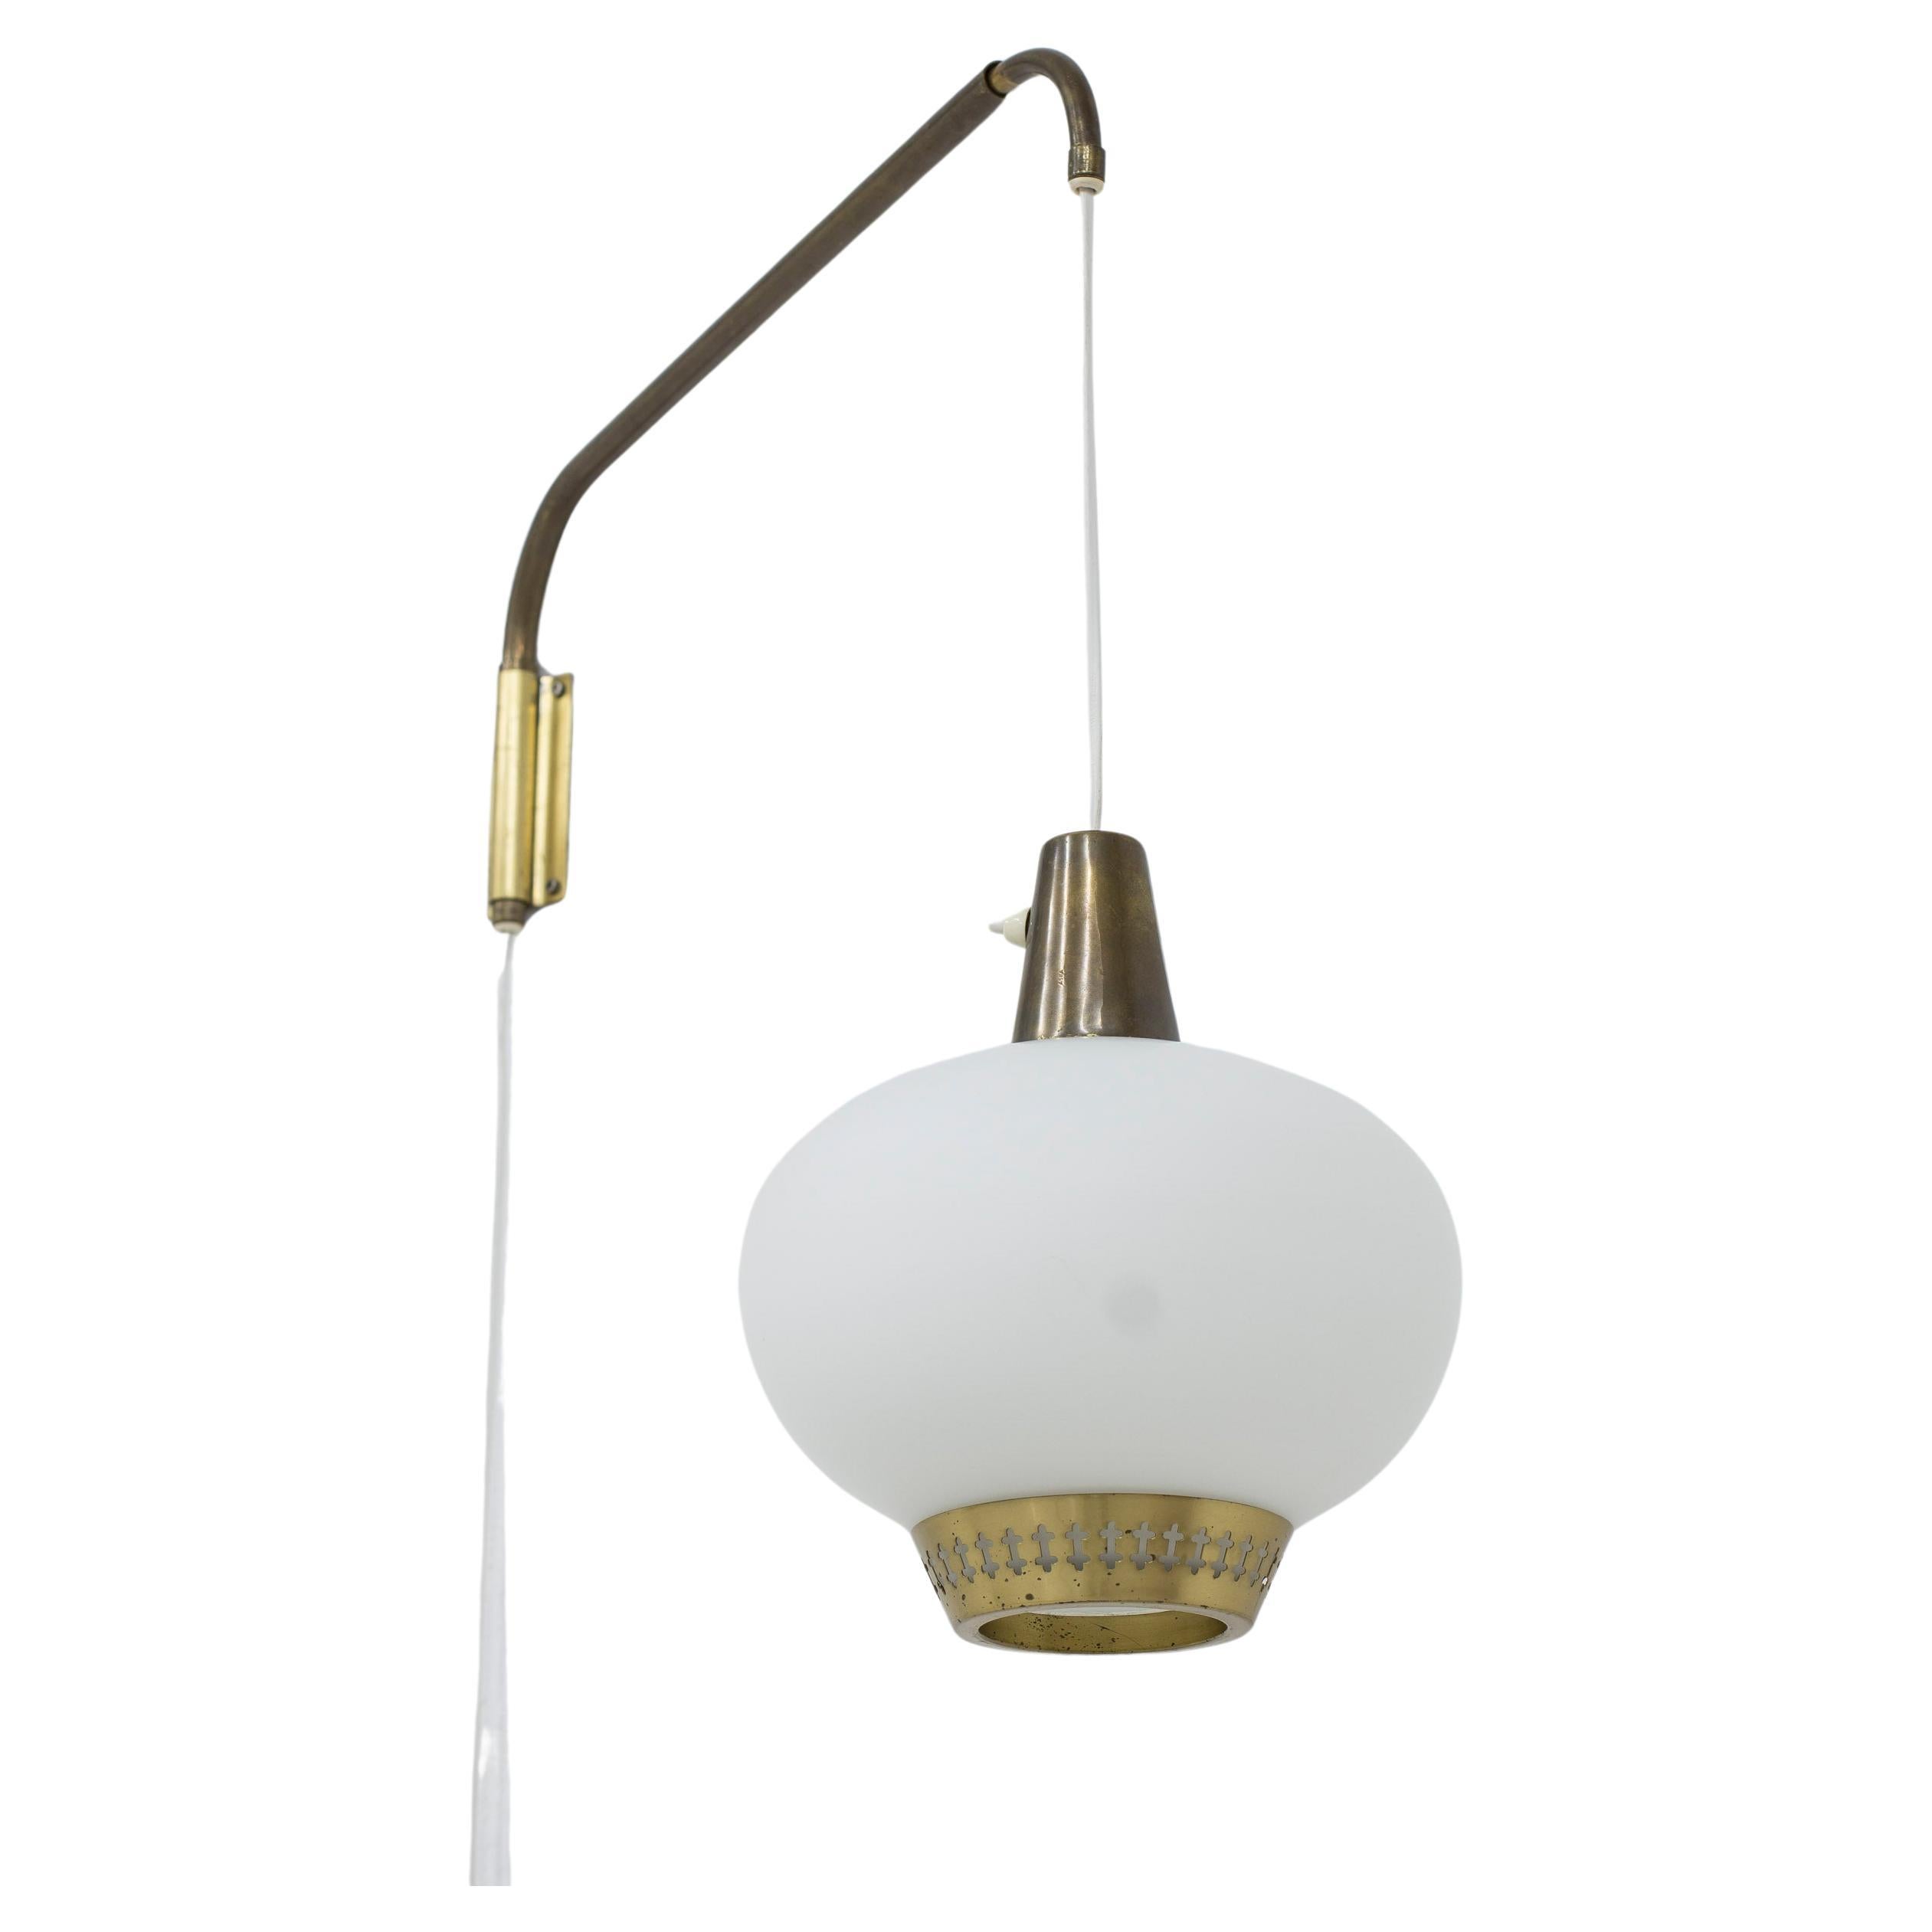 Glass and brass wall lamp by Hans Bergström for ASEA belysning, Swedish modern For Sale